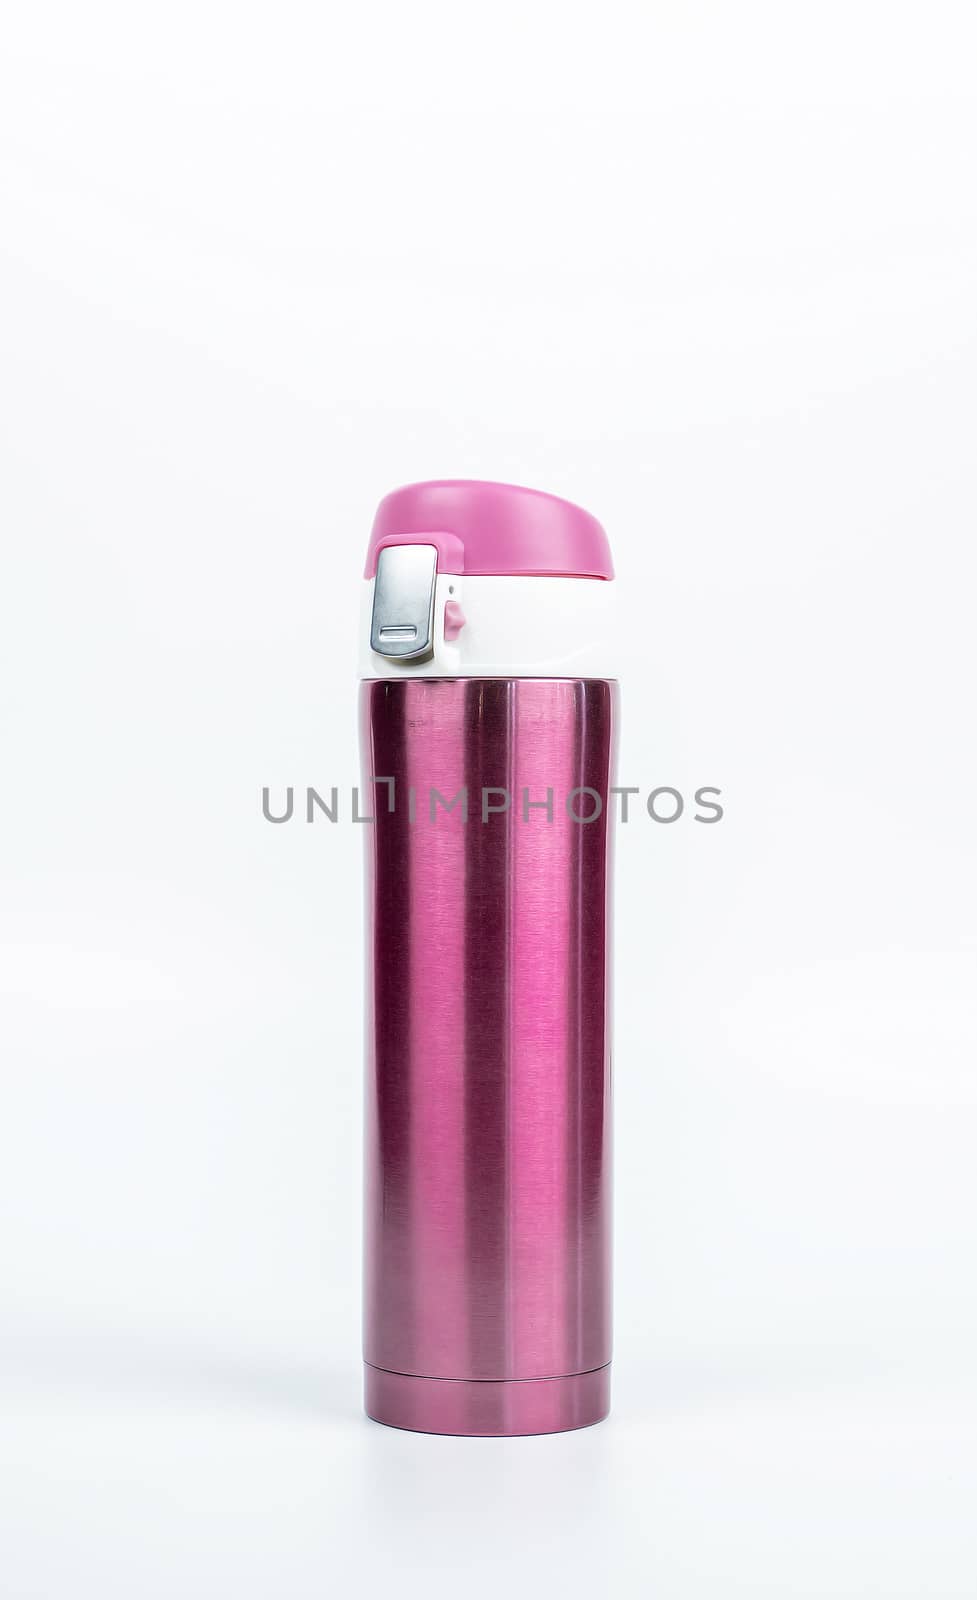 Pink thermos bottle isolated on white background with copy space. Beverage container. Coffee and tea bottle.